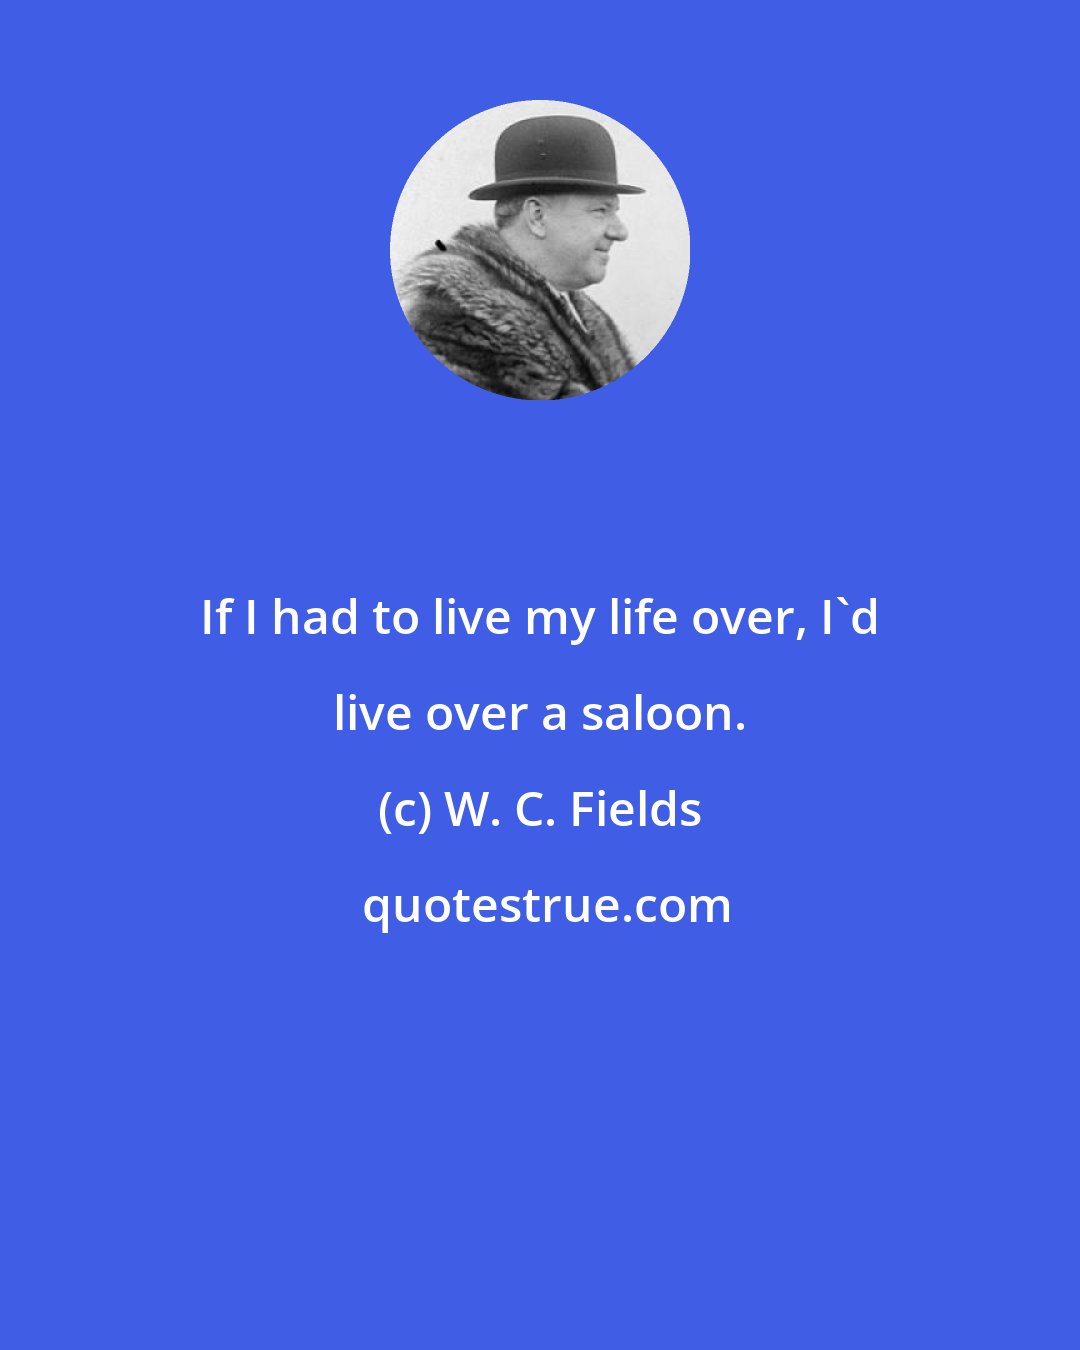 W. C. Fields: If I had to live my life over, I'd live over a saloon.